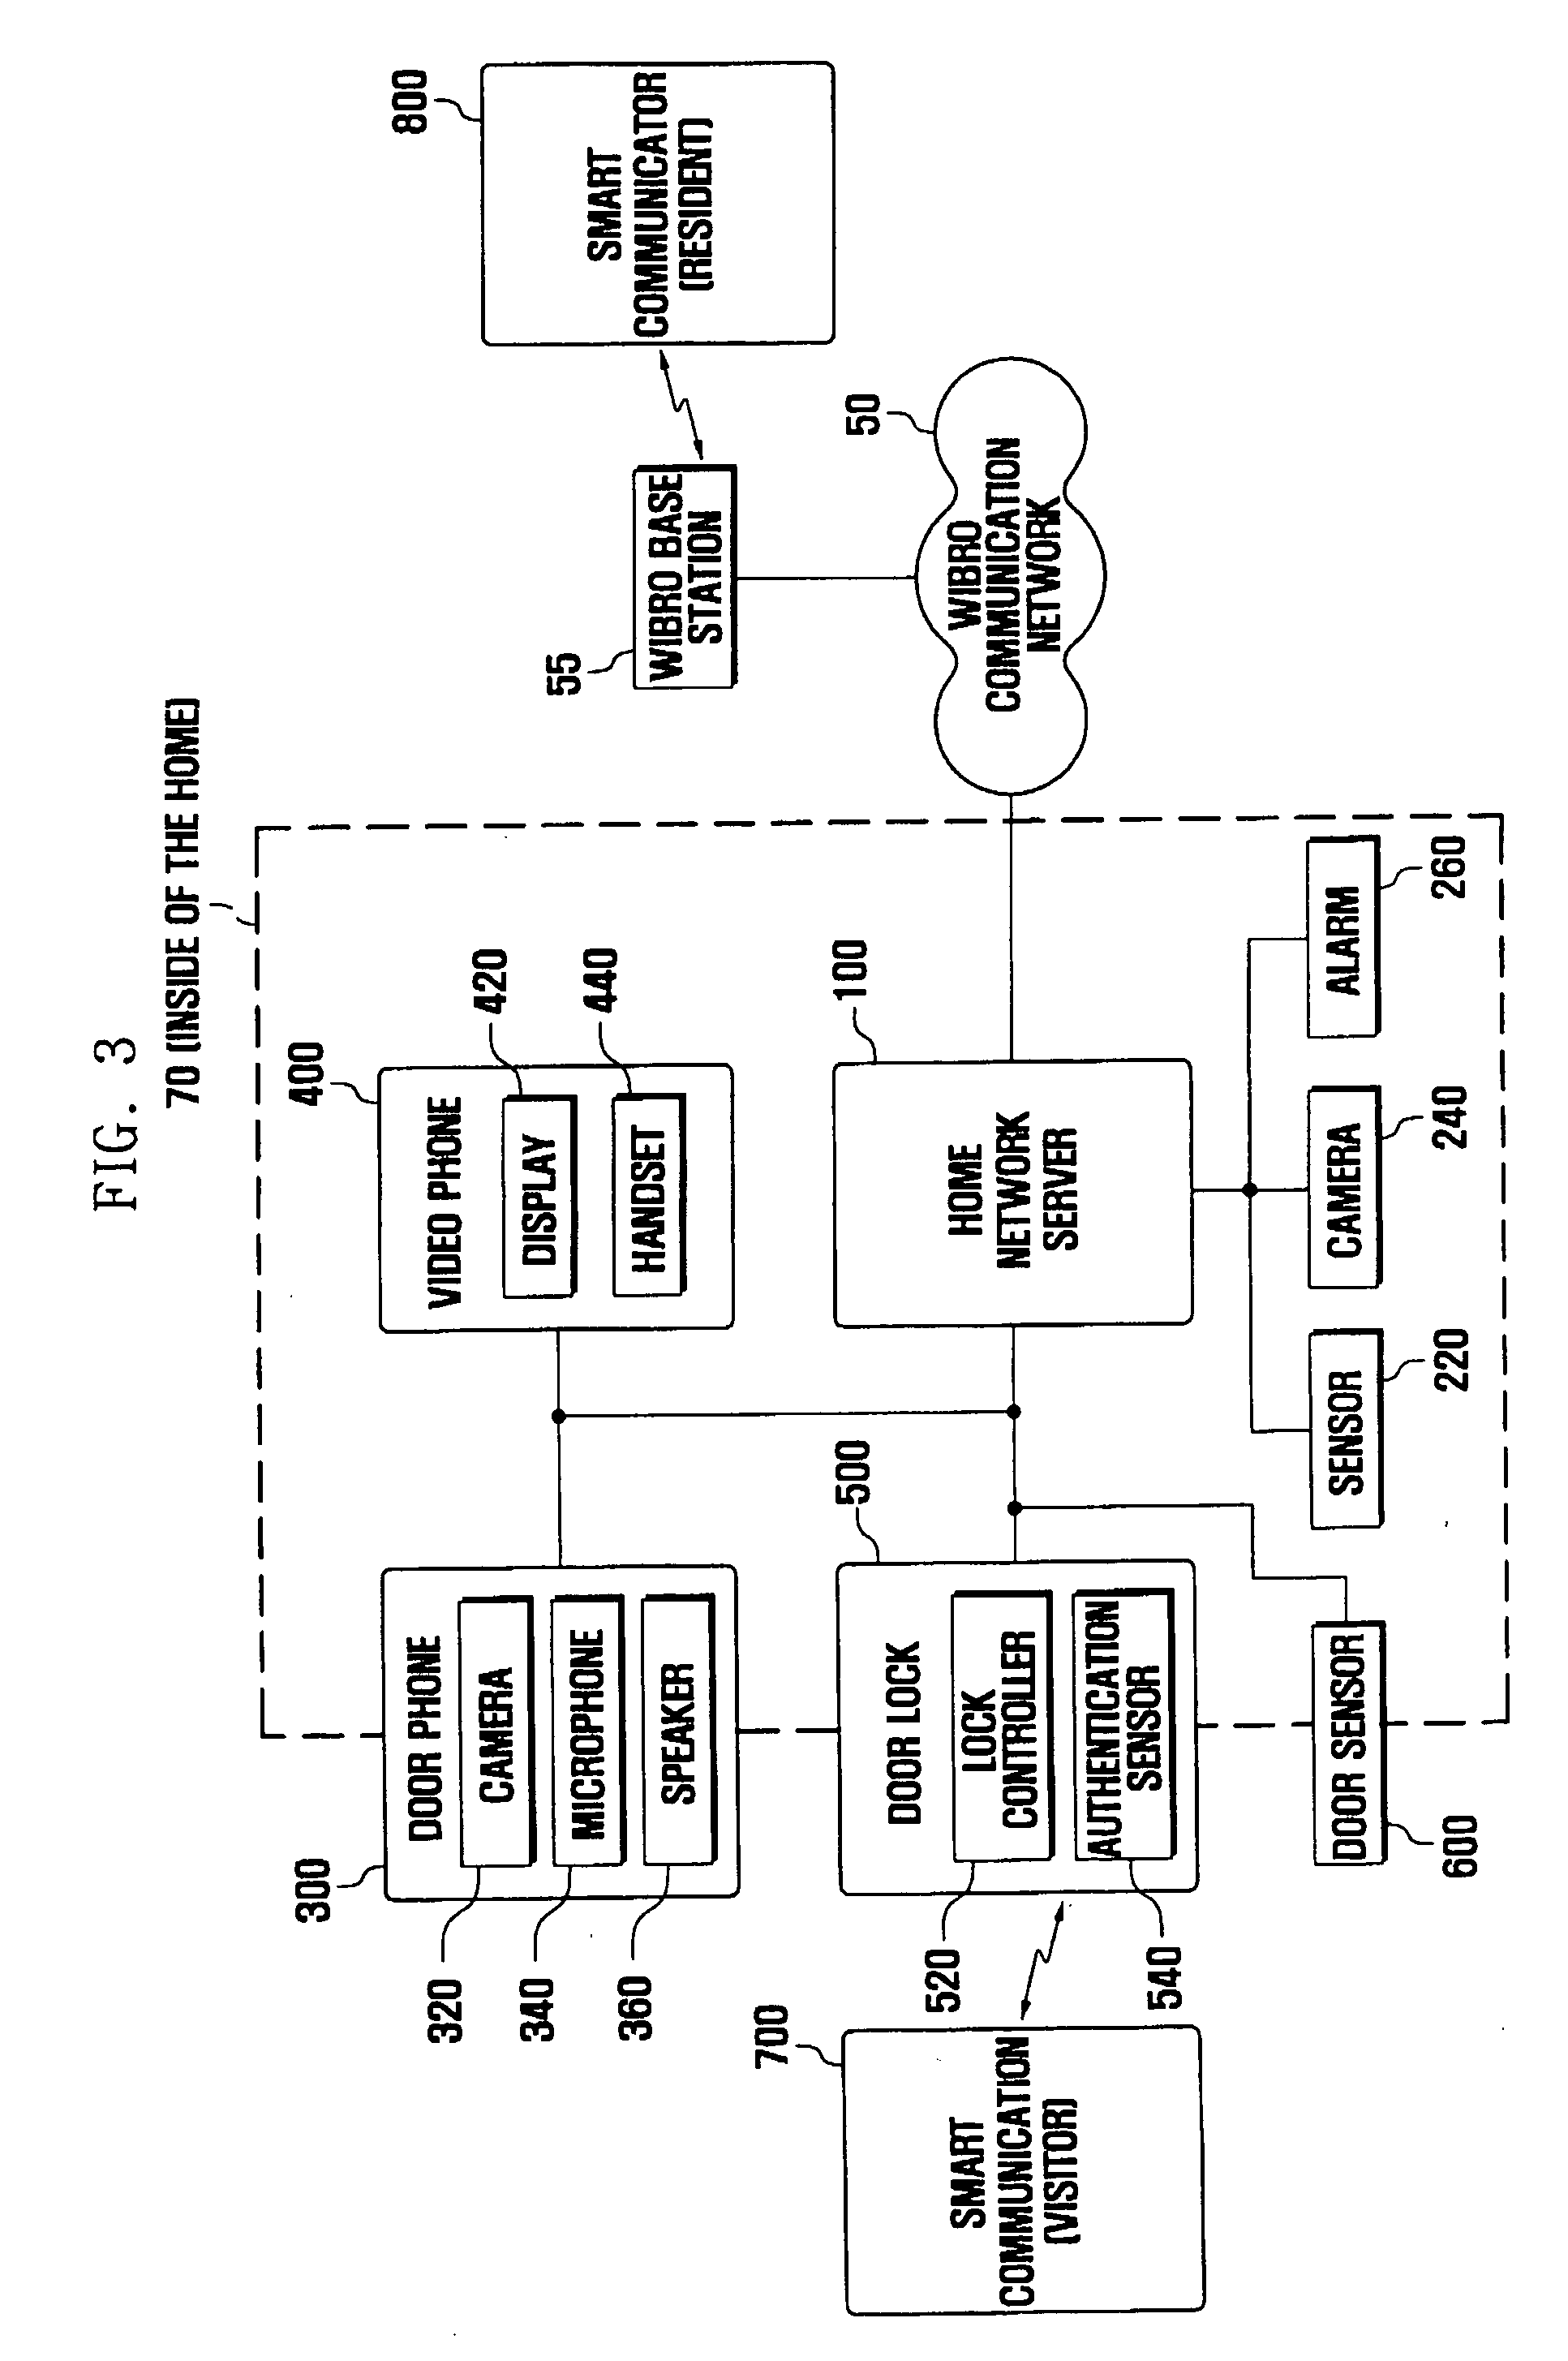 Access authentication system and method using smart communicator